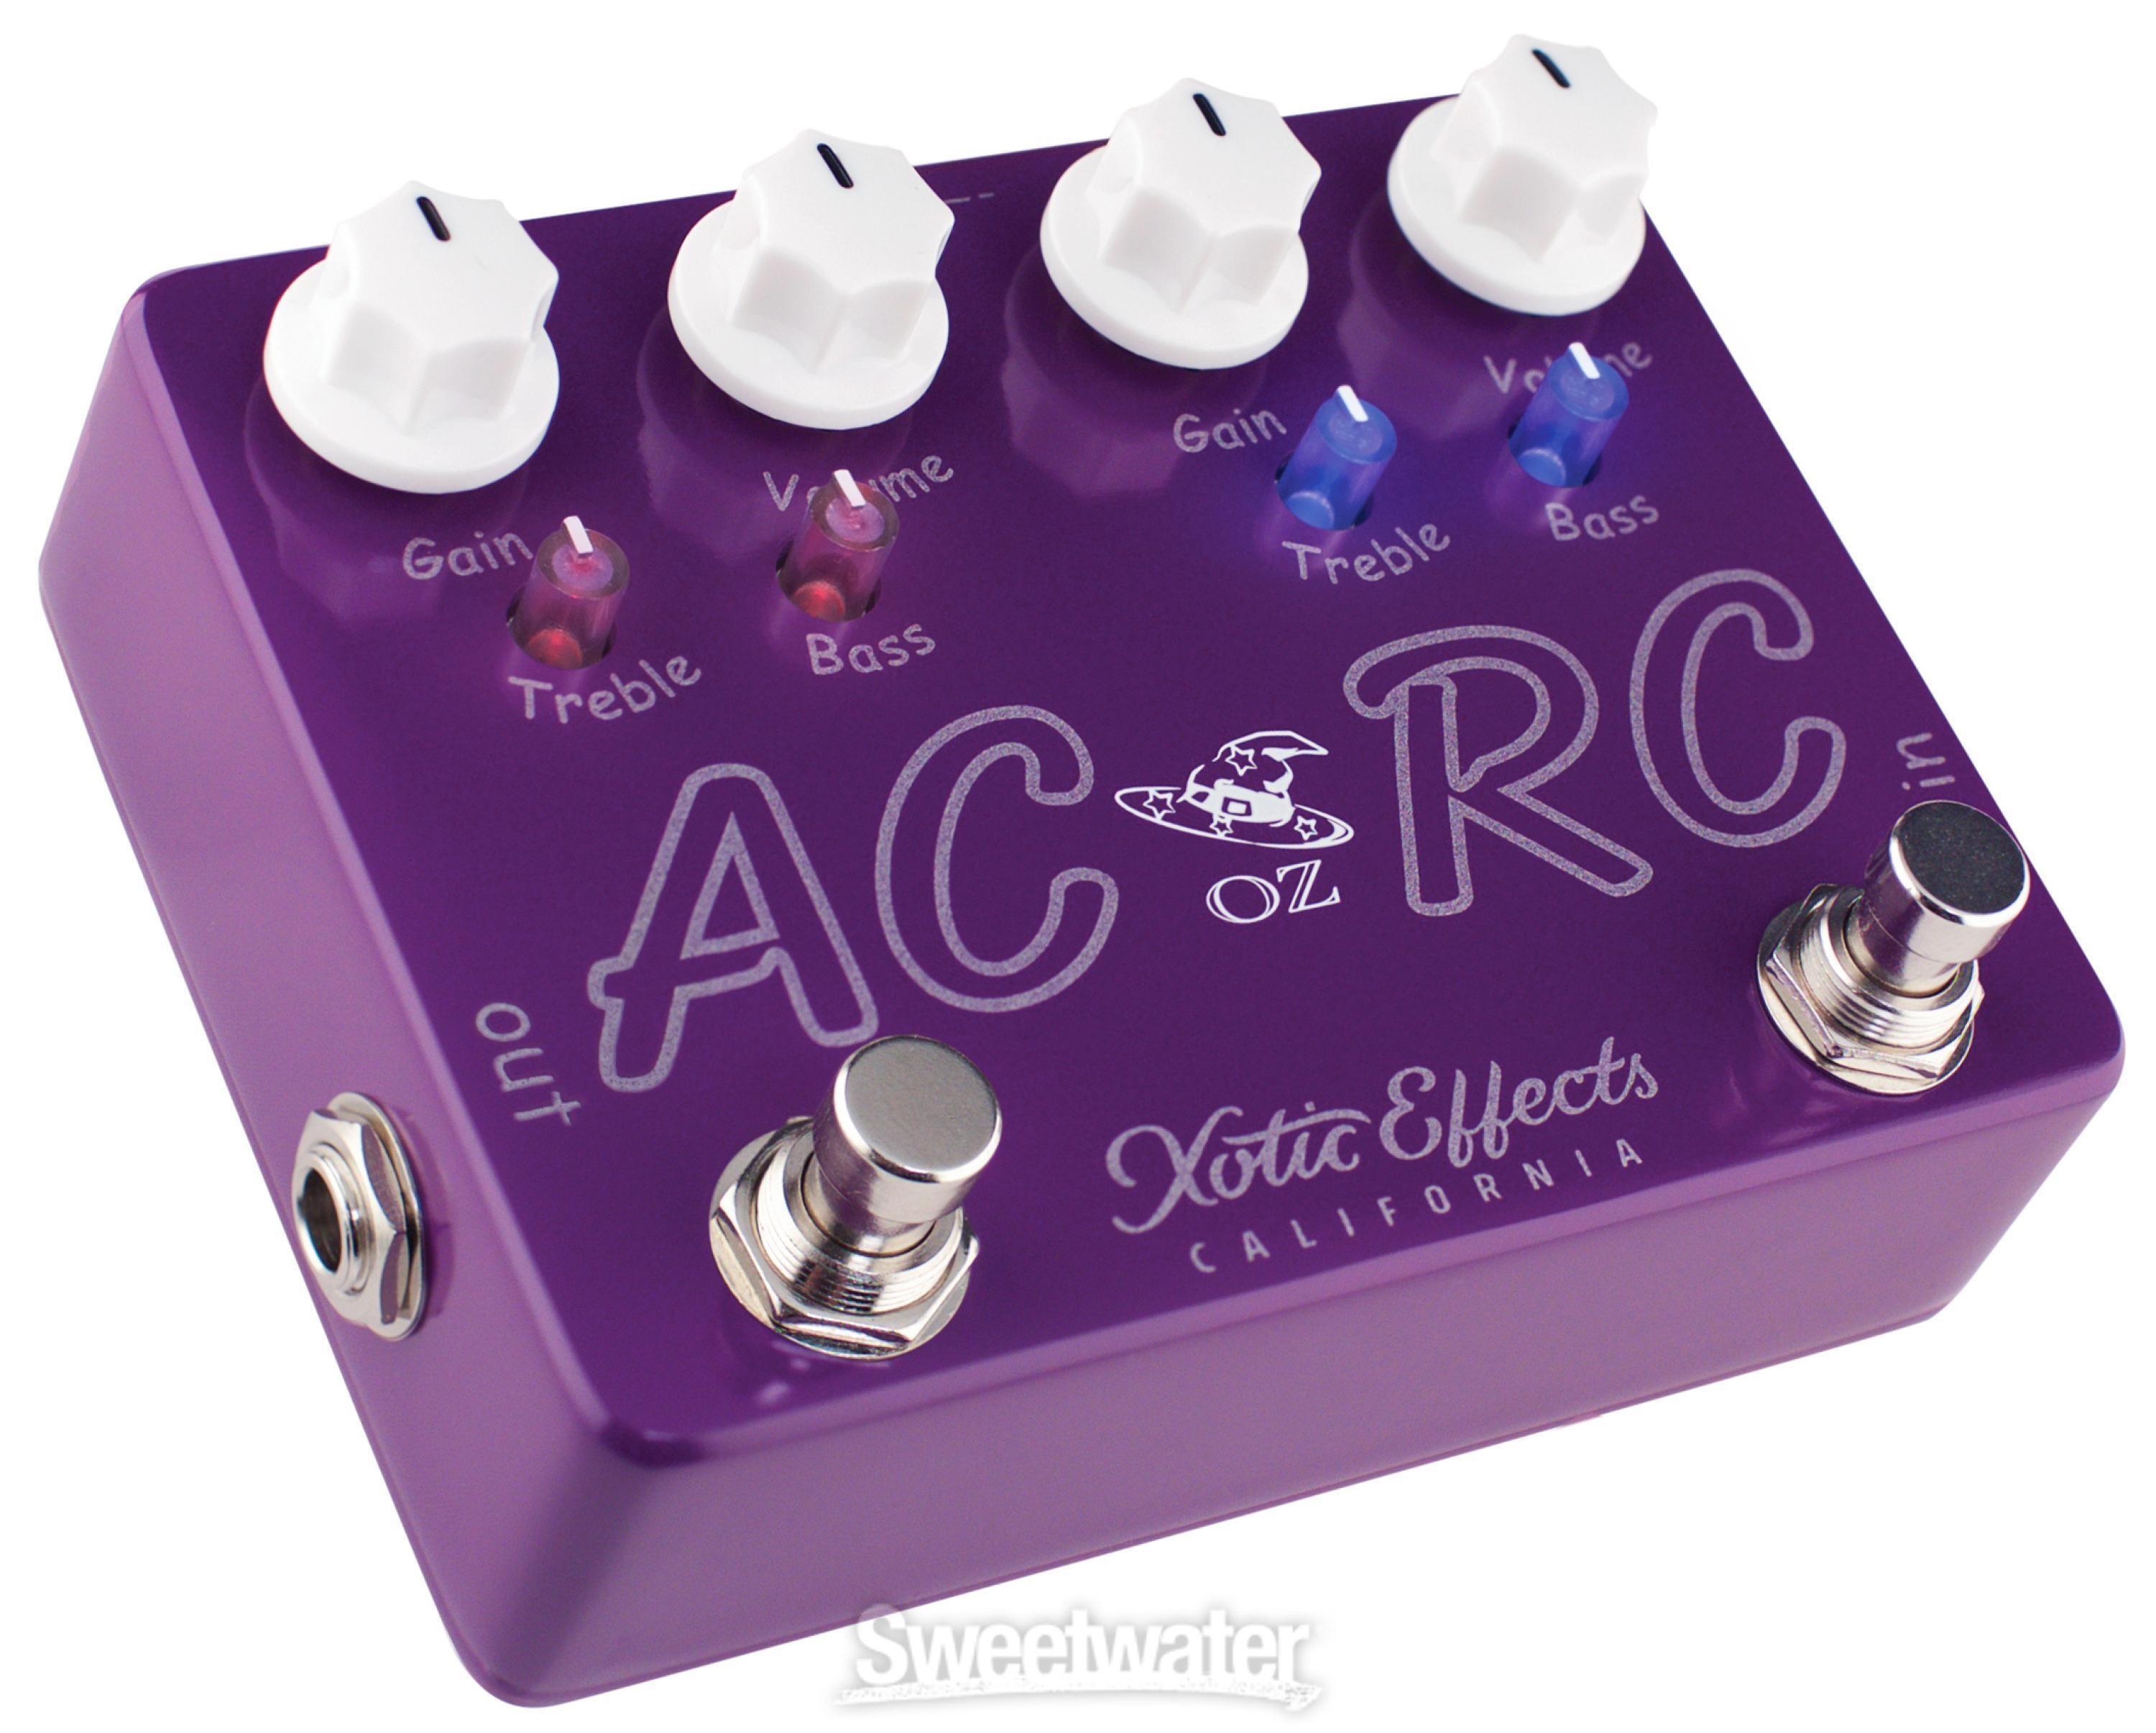 Xotic AC/RC-OZ Booster Pedal | Sweetwater